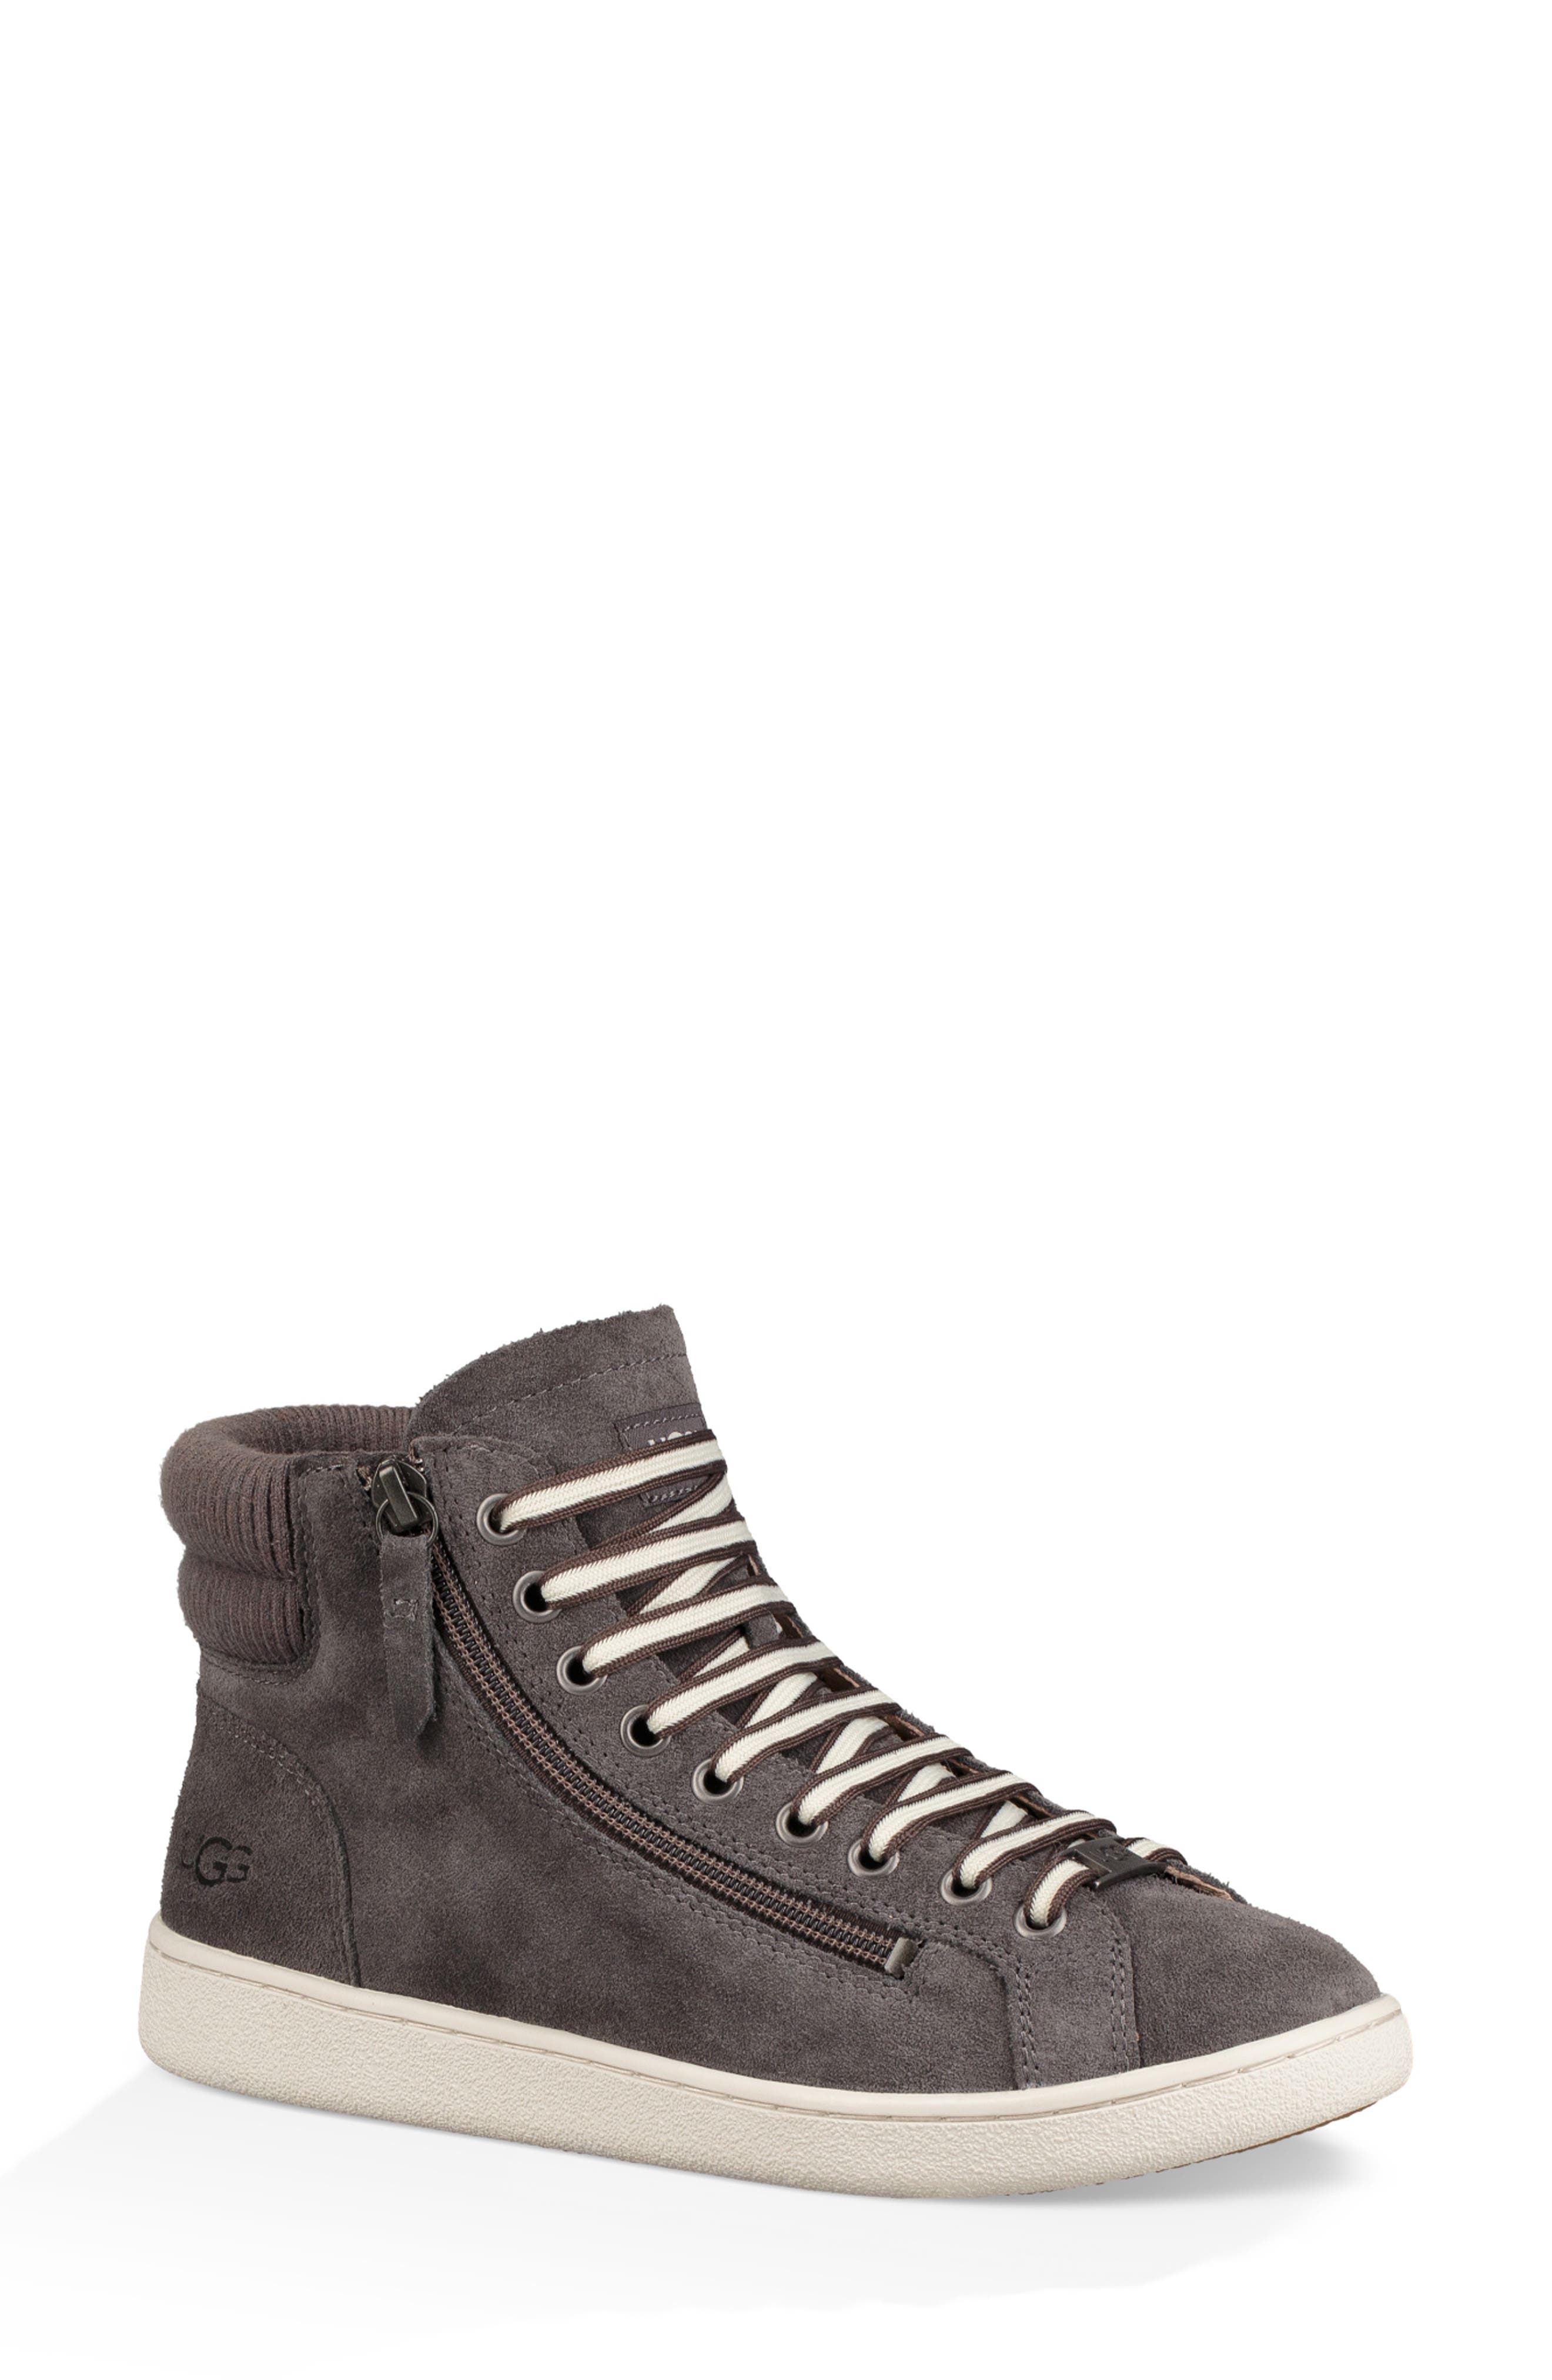 ugg olive high top sneaker charcoal